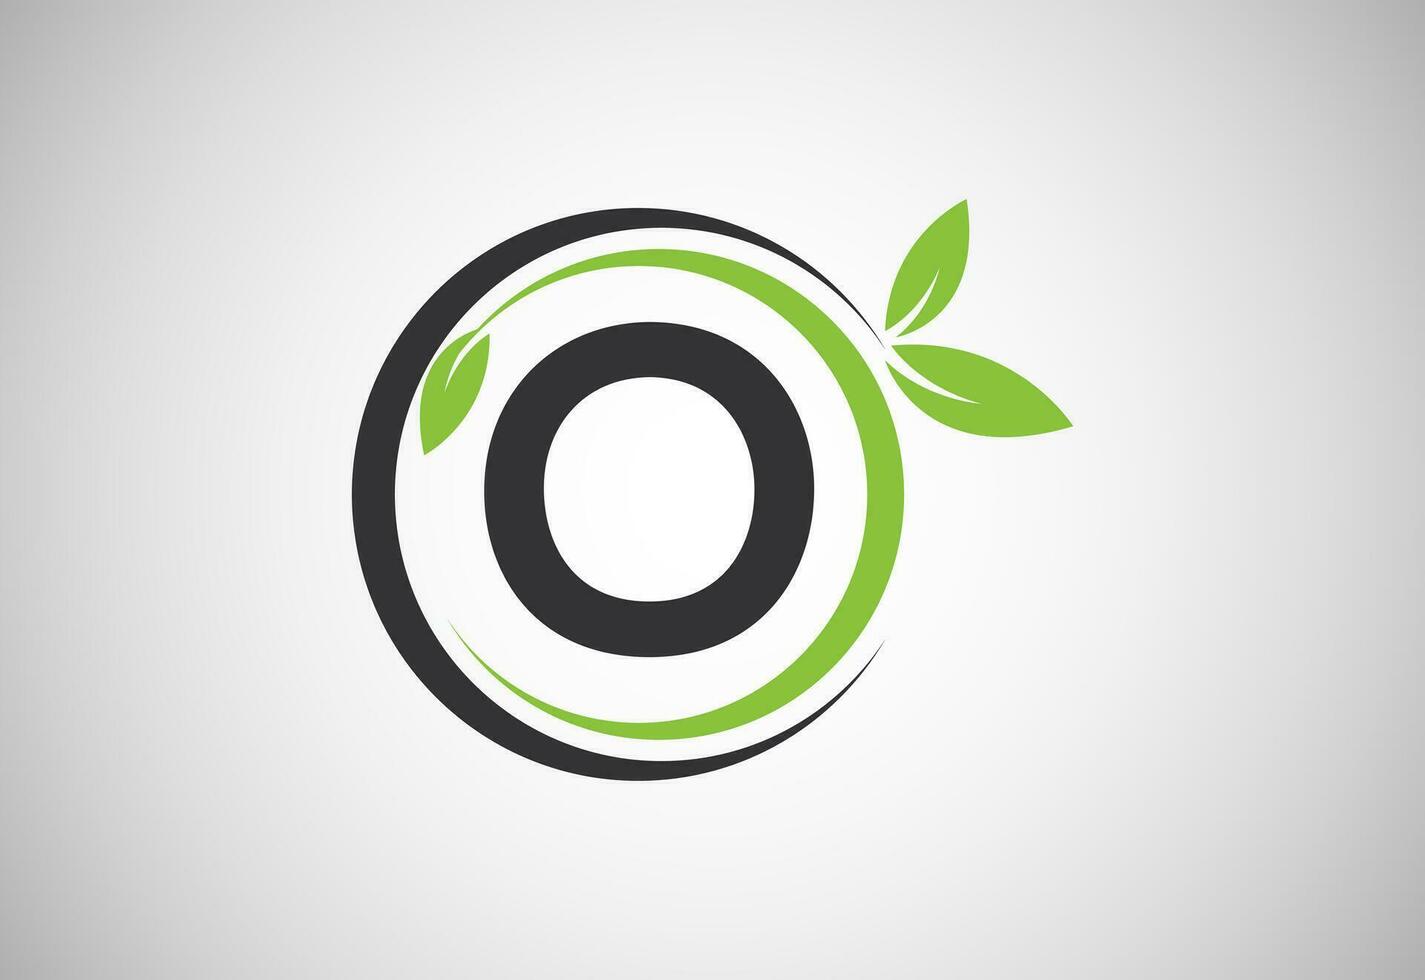 English alphabet O with green leaves. Organic, eco-friendly logo design vector template